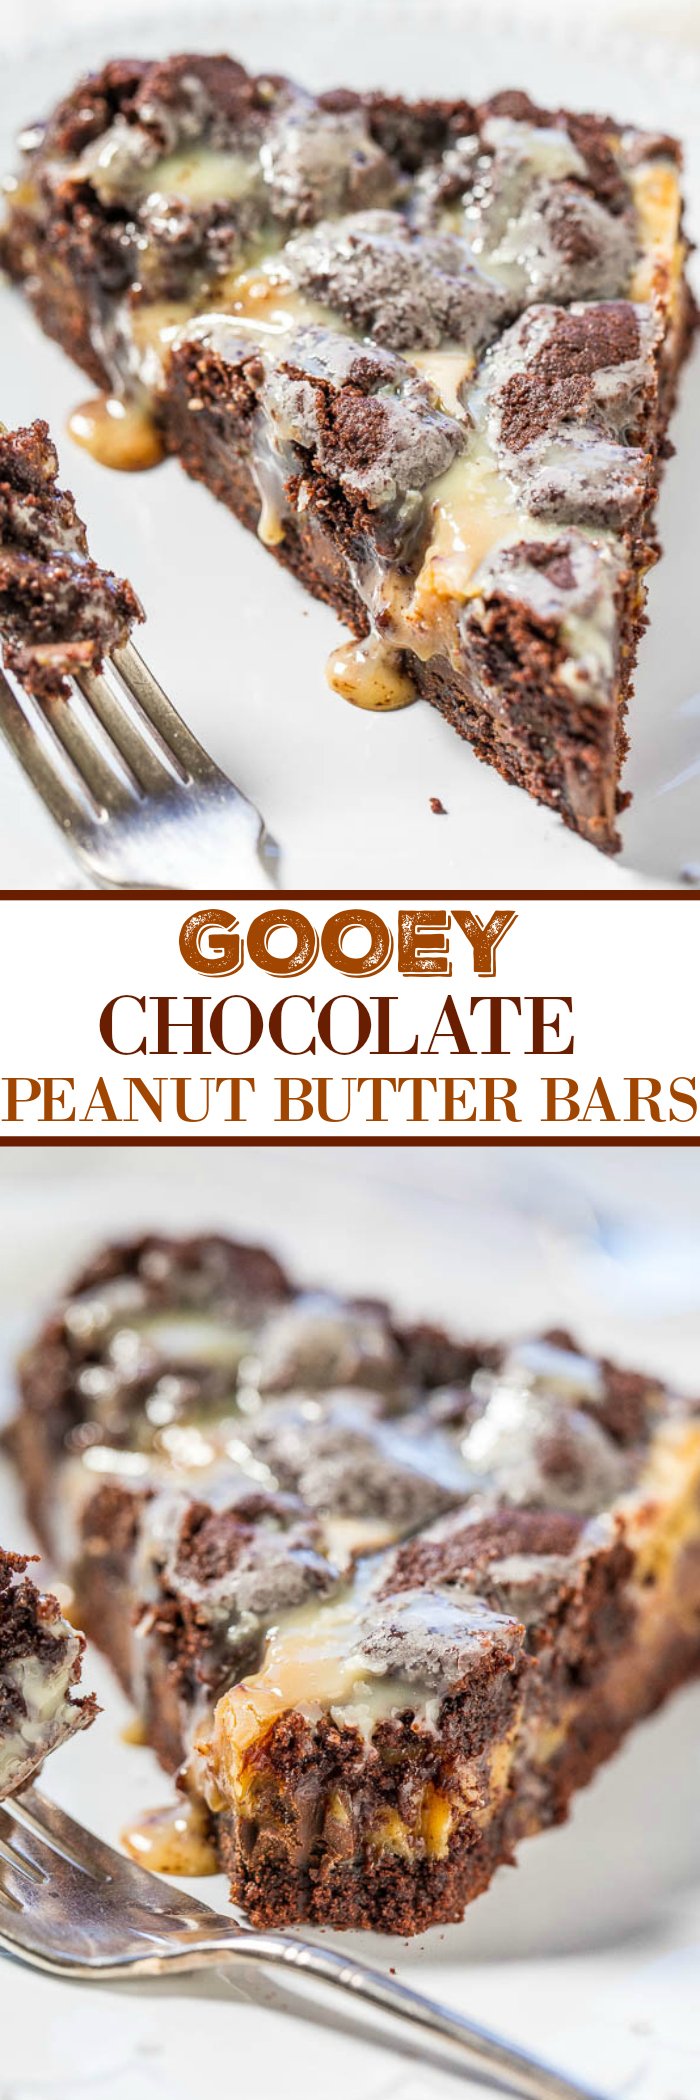 Gooey Chocolate Peanut Butter Bars - A rich, fudgy, decadent, brownie-like base with a peanut butter mixture poured over the top!! Fast and easy! So gooey and so good!!